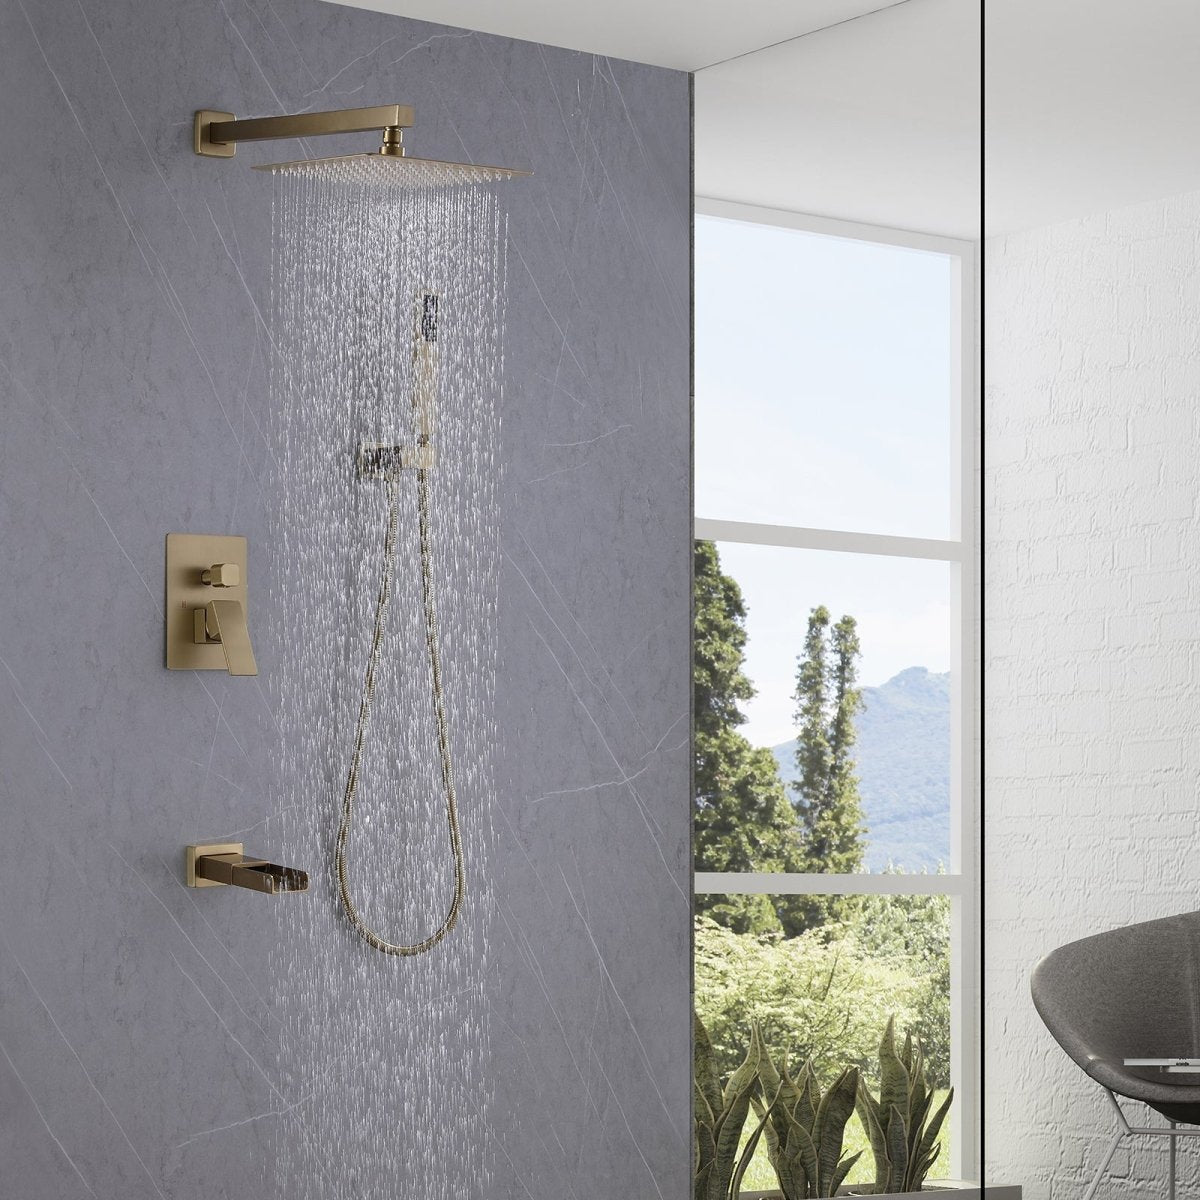 Waterfall Spout 3-Spray Tub and Shower Faucet Brushed Gold - buyfaucet.com